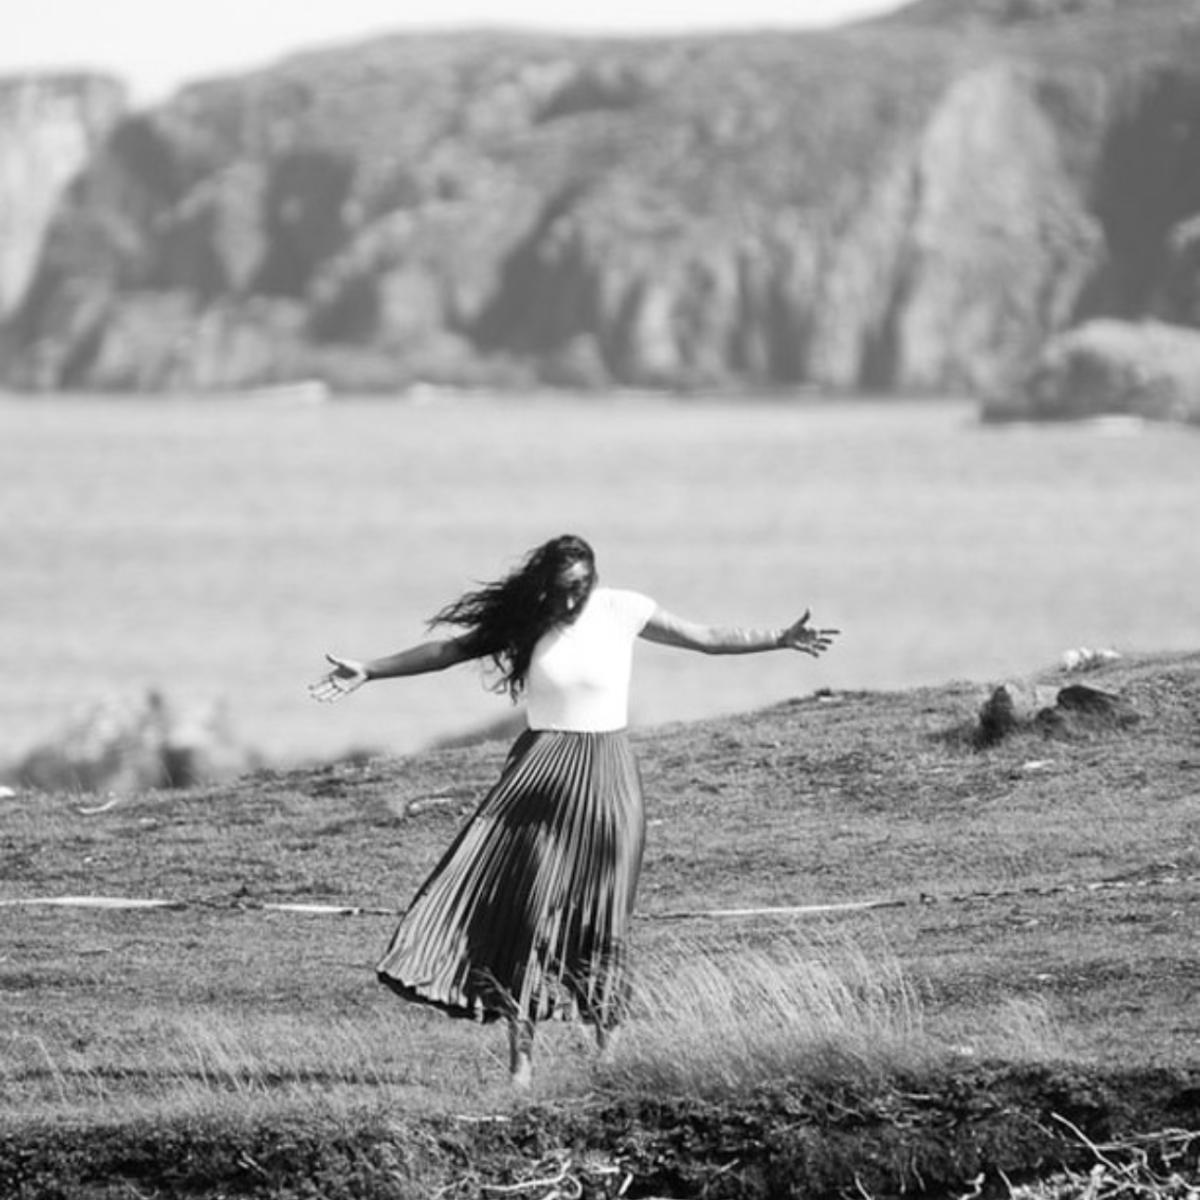 A woman dances on a cliff by the ocean.